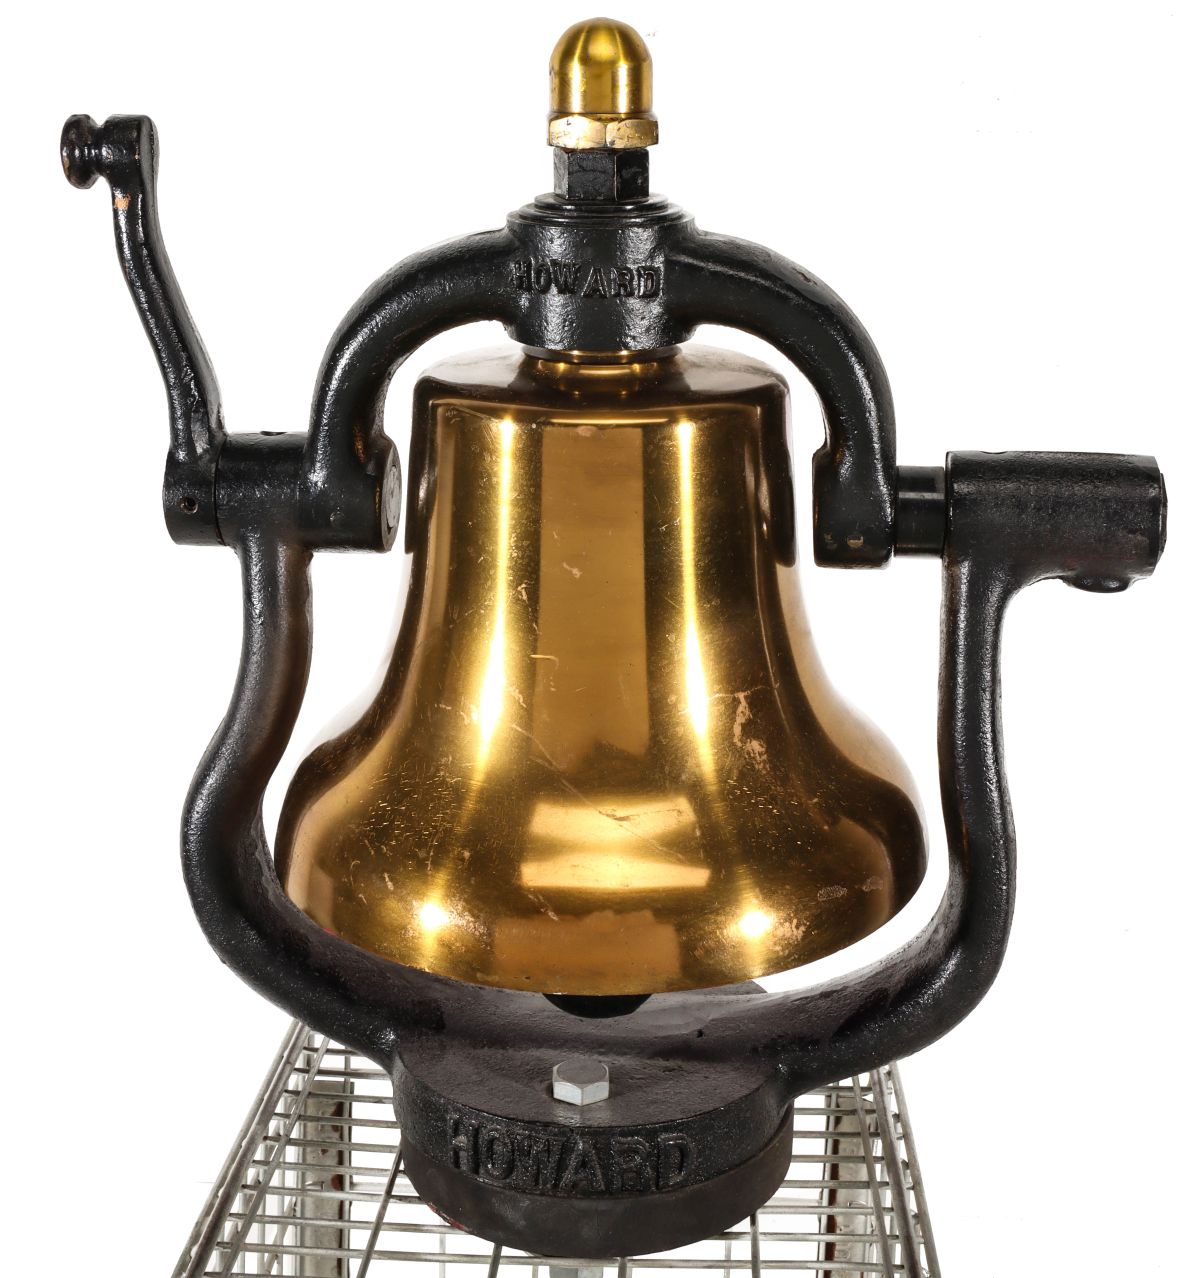 A HOWARD 12-INCH LOCOMOTIVE BELL WITH RED INTERIOR